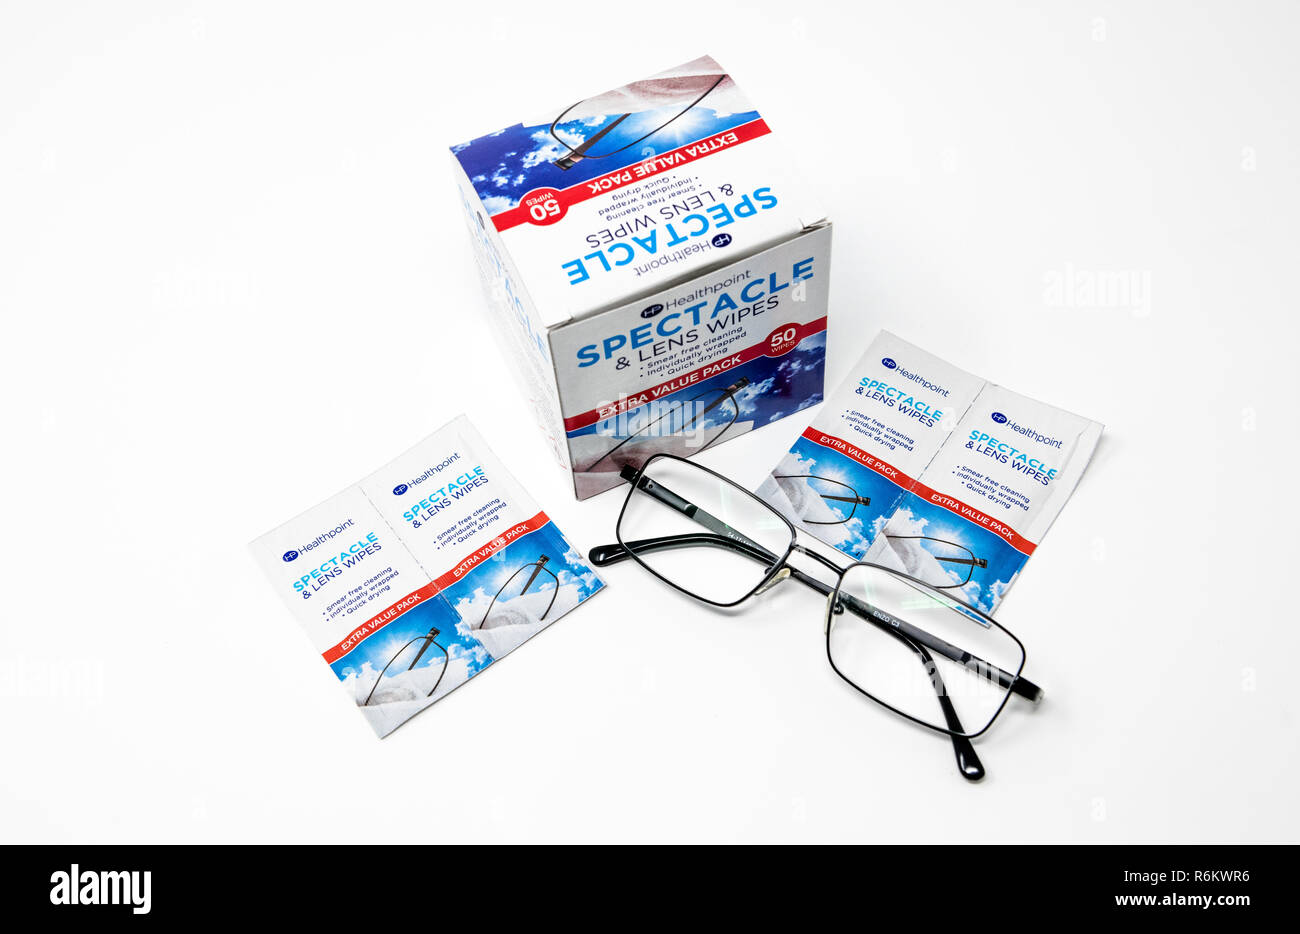 Healthpoint lens and spectacle wipes. Stock Photo